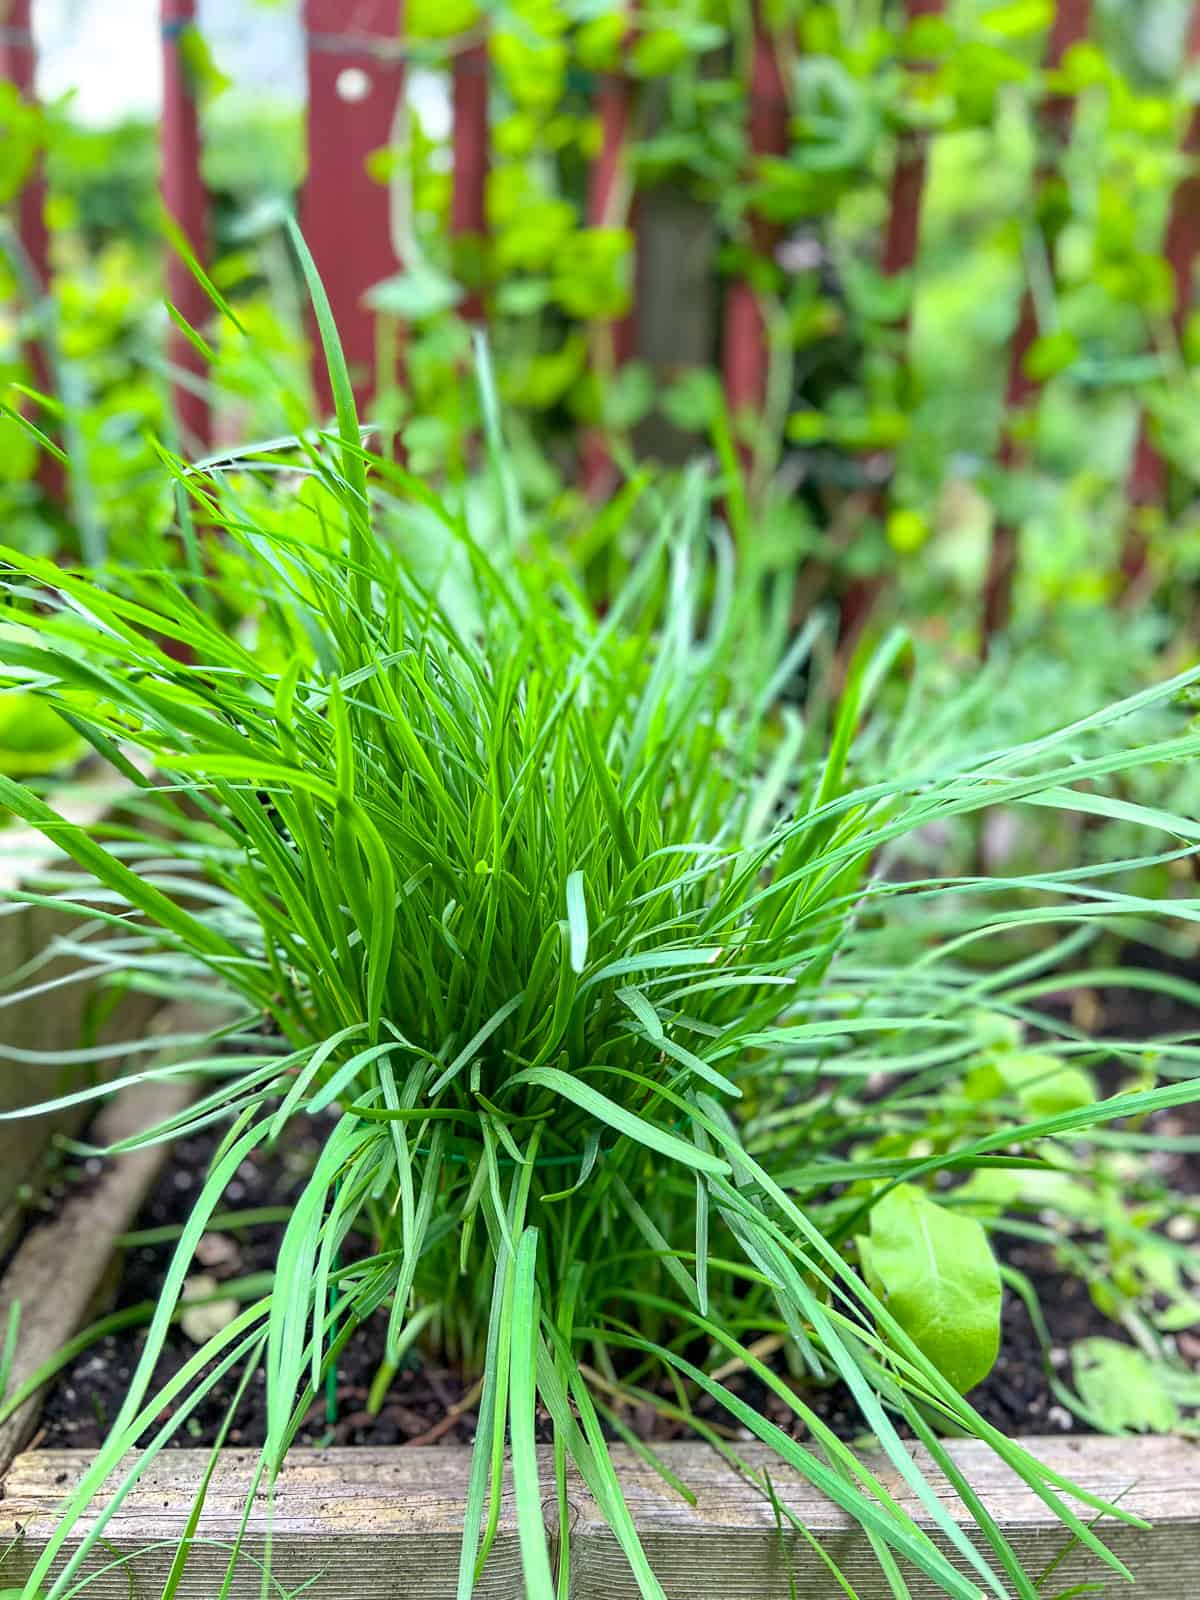 An image of garlic chives in a raised bed, left intact during seasonal garden maintenance.